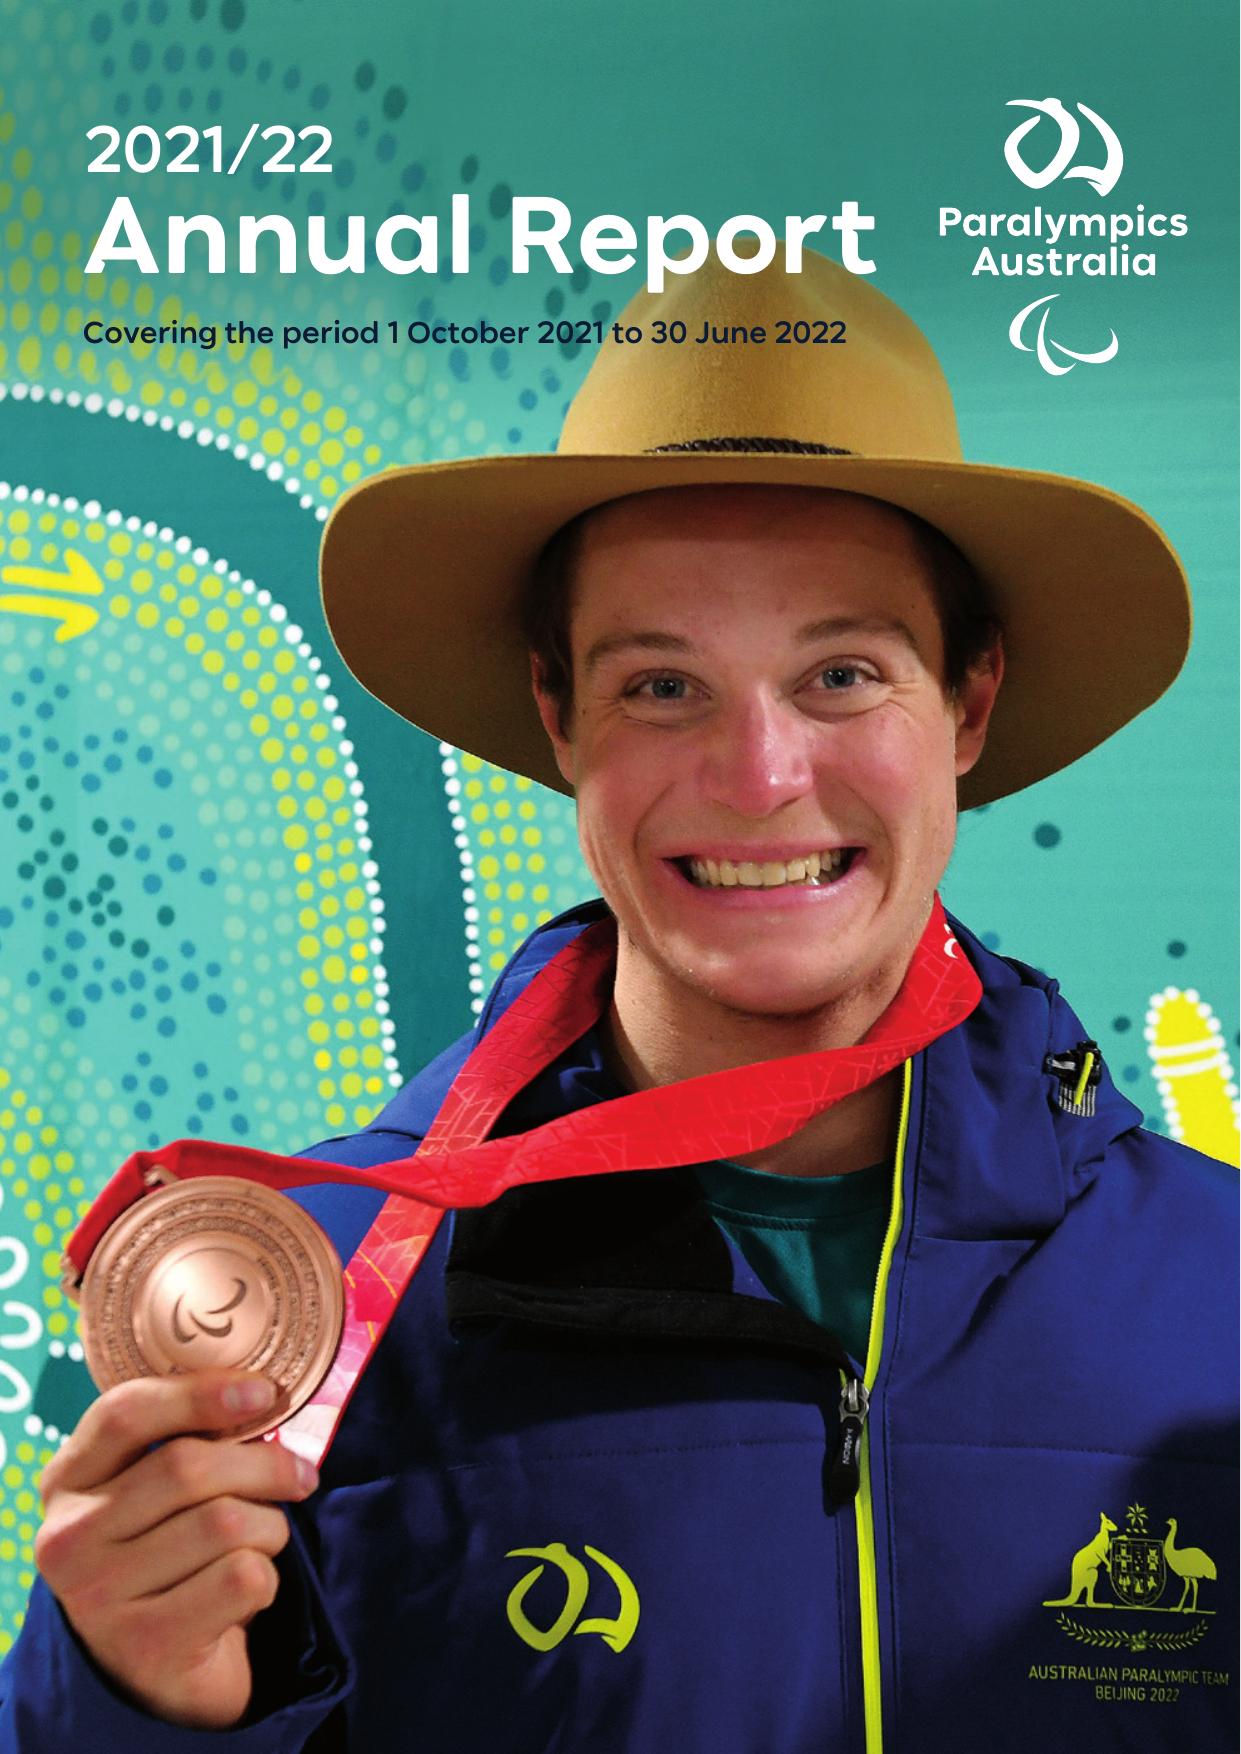 PARALYMPIC.ORG 2022 Annual Report